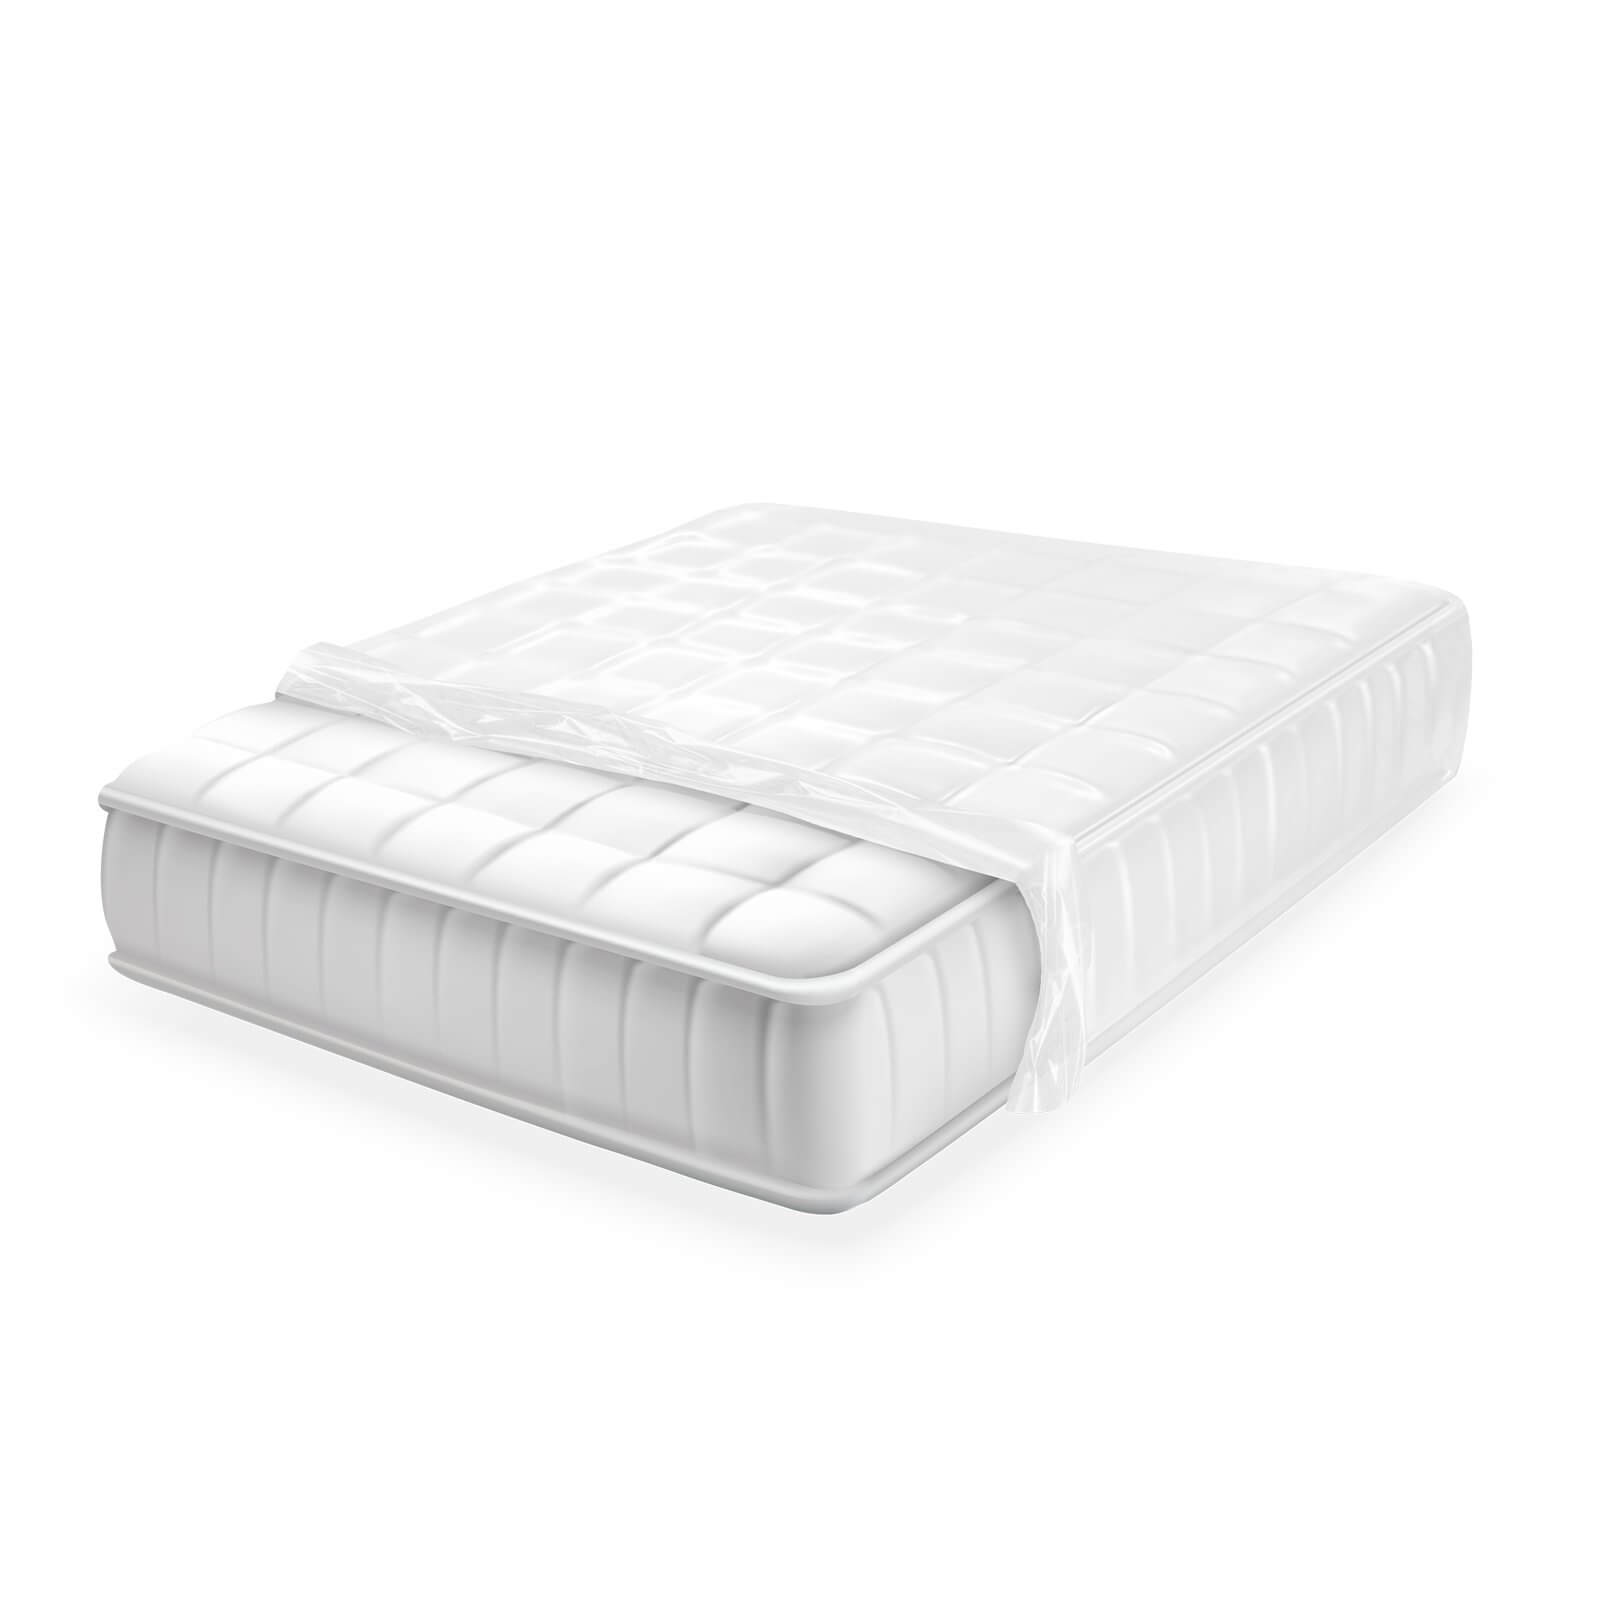 Queen Mattress Protection Cover